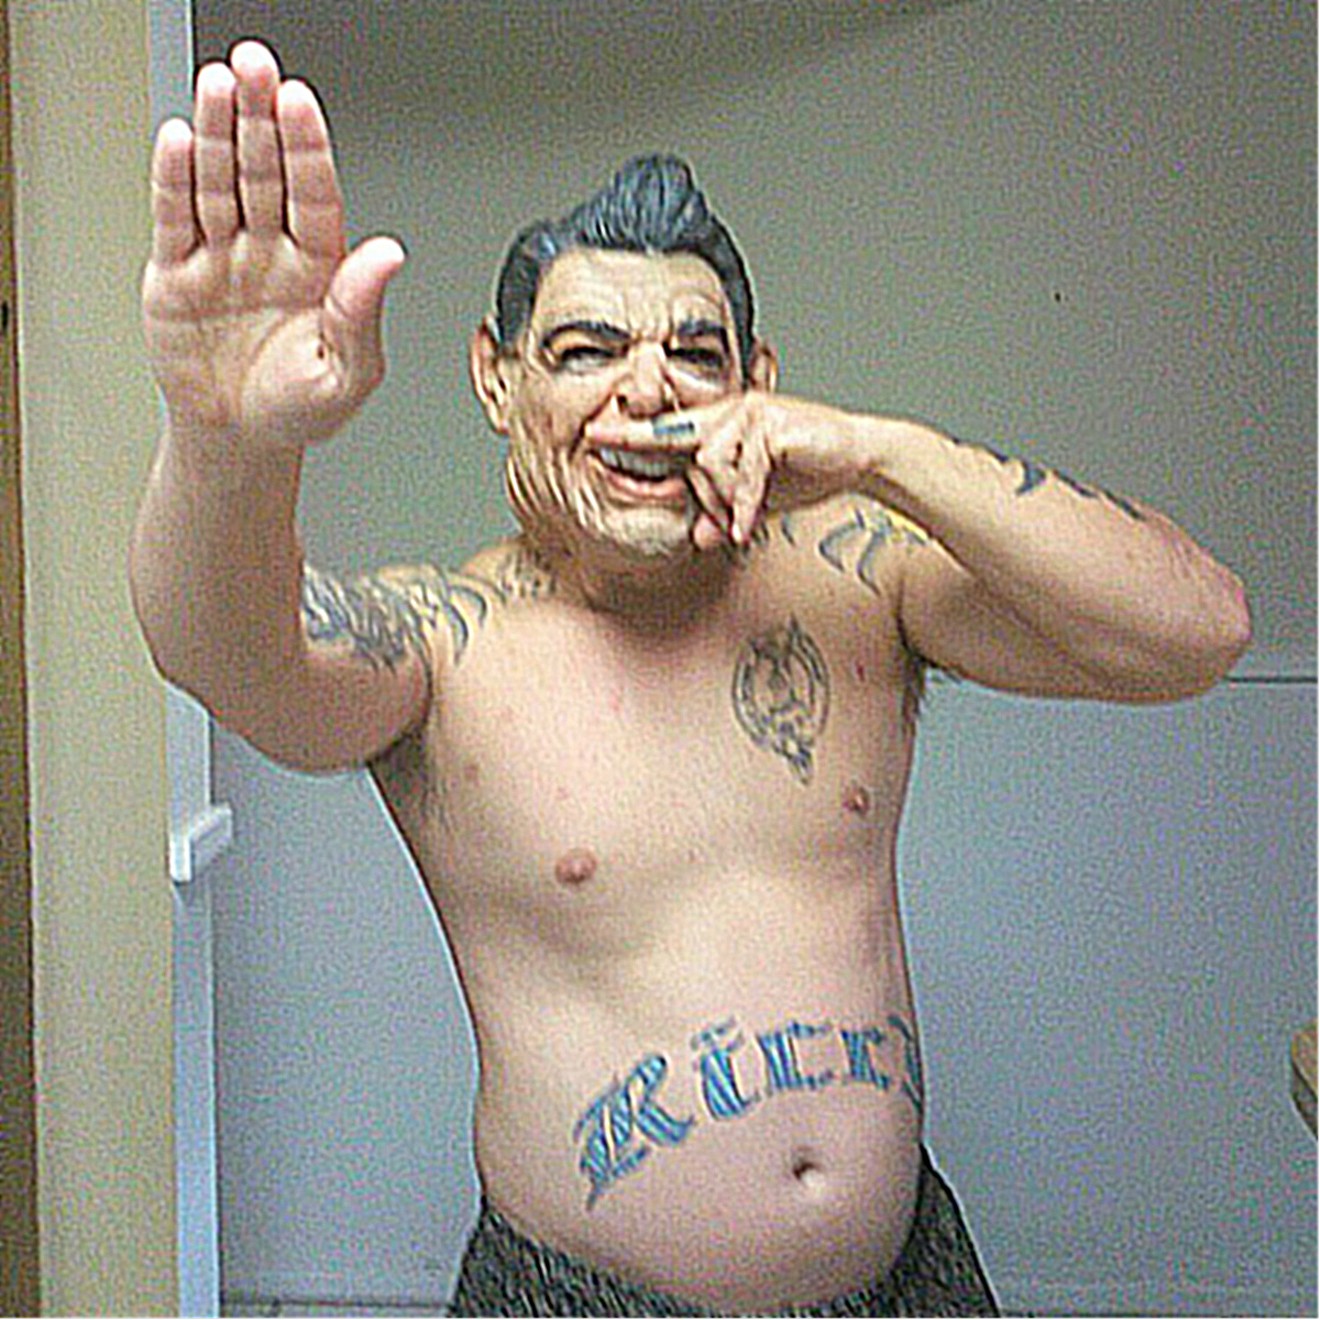 Ricci's attorney Jennifer Willmott says Ricci is "not a neo-Nazi," but his tattoos — the Hitler 'stache on his middle finger and the SS bolts near his neck, among others — argue otherwise.